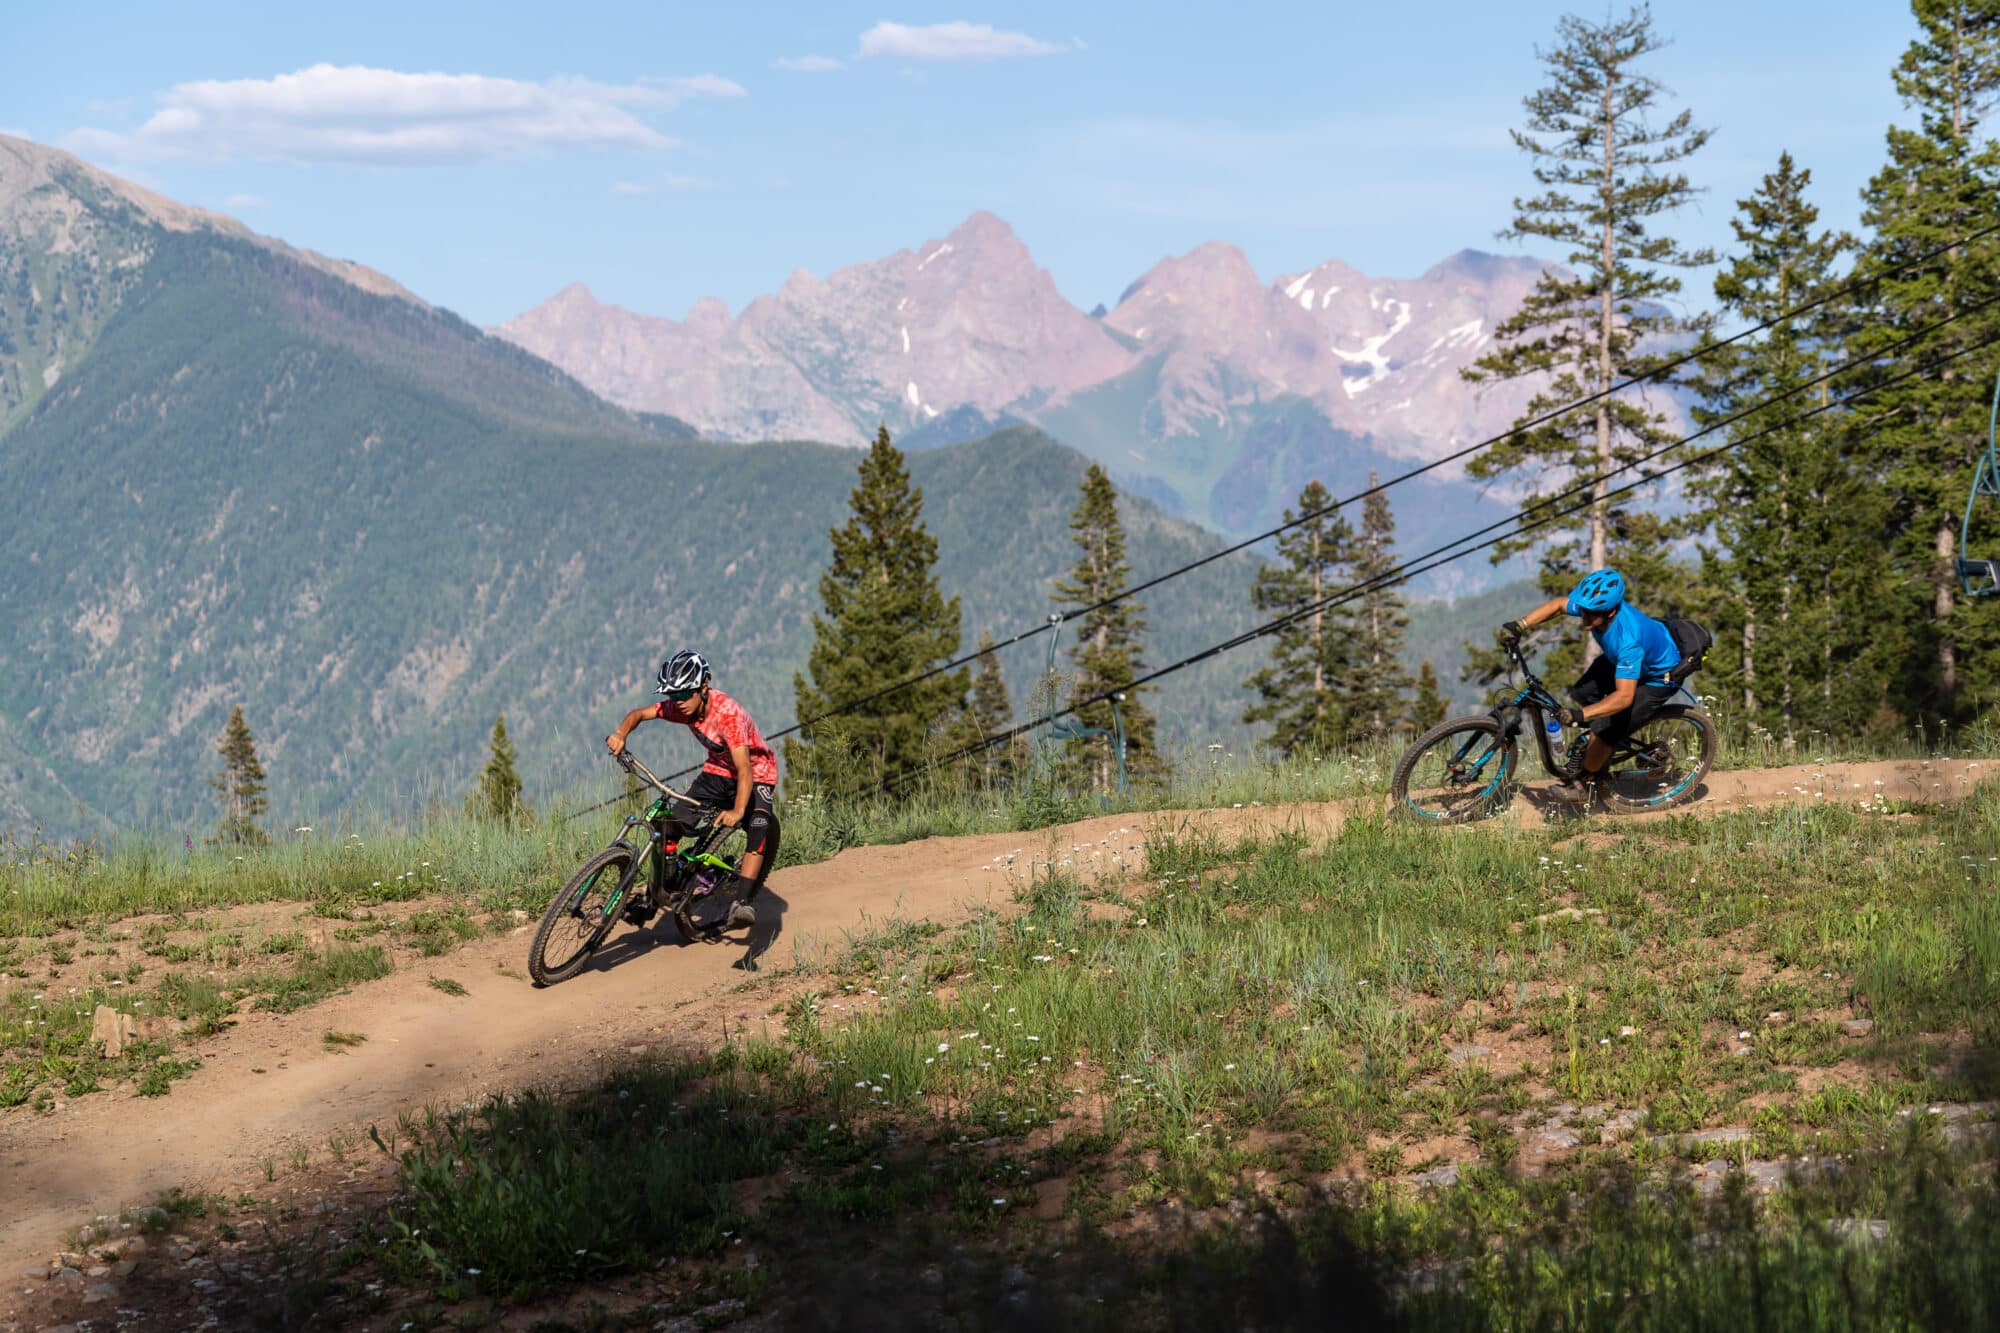 Mountain bikers attack a corner turn with the twilight mountains in the background